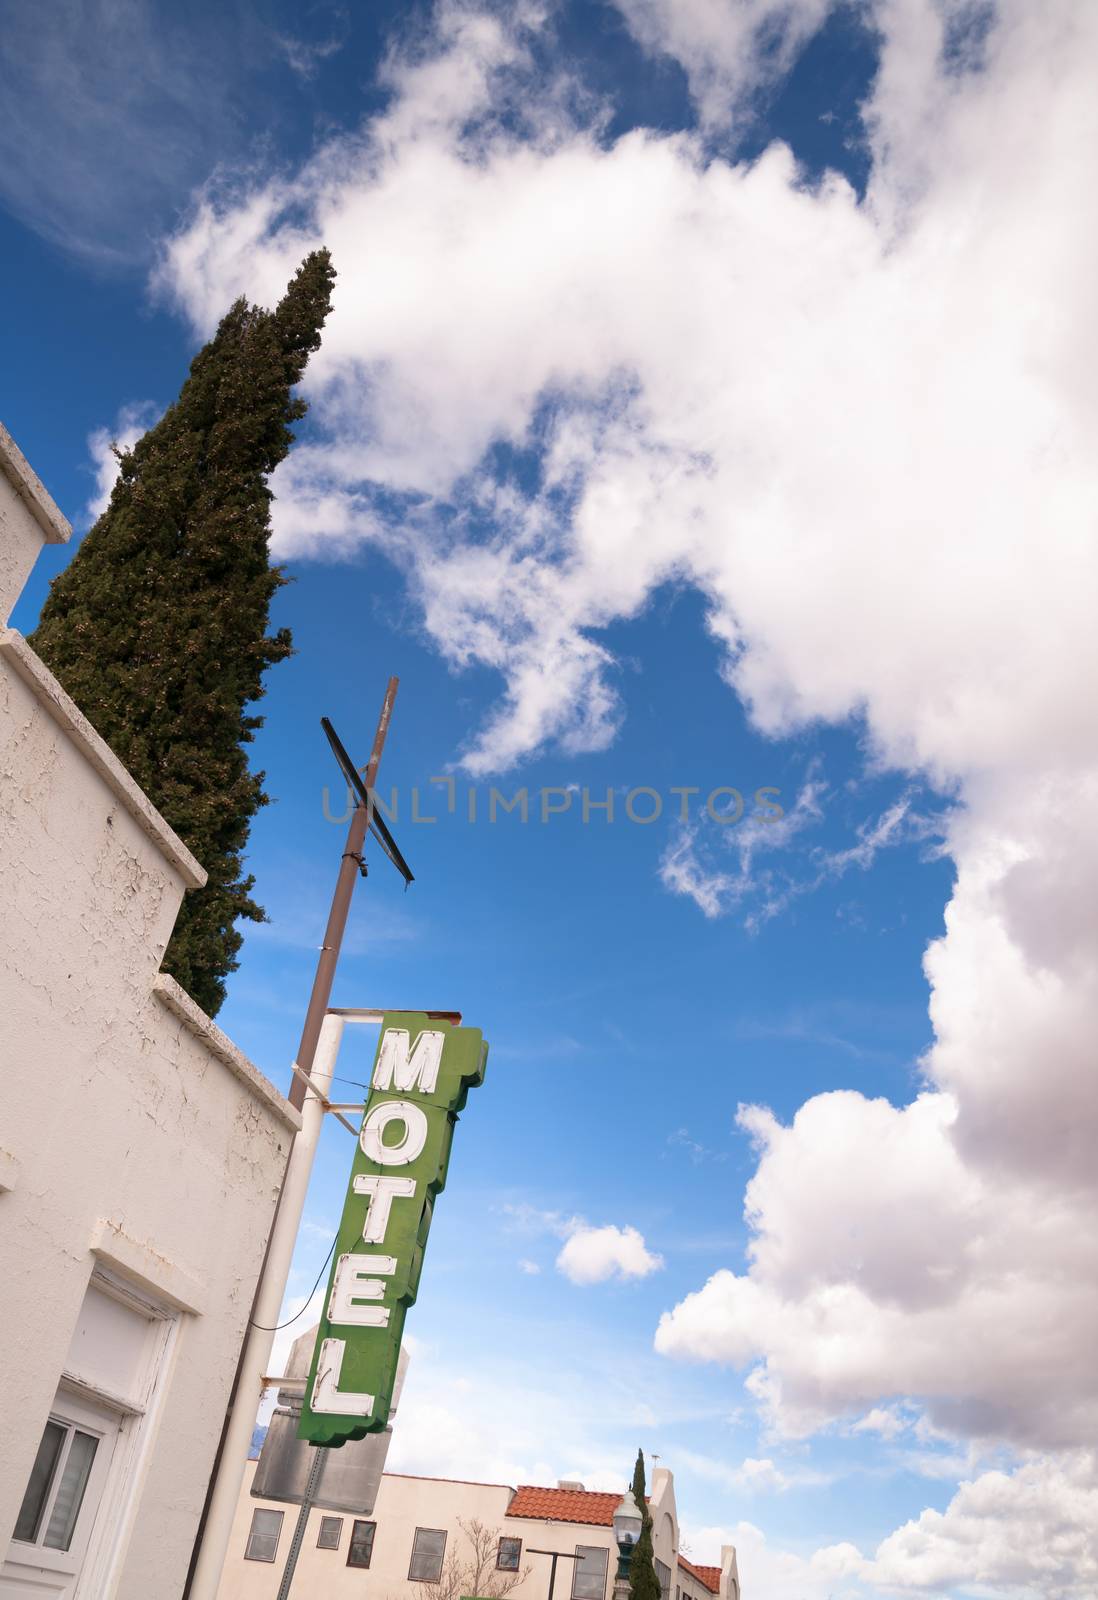 Neon Motel Sign Clear Blue Sky White Billowing Clouds by ChrisBoswell